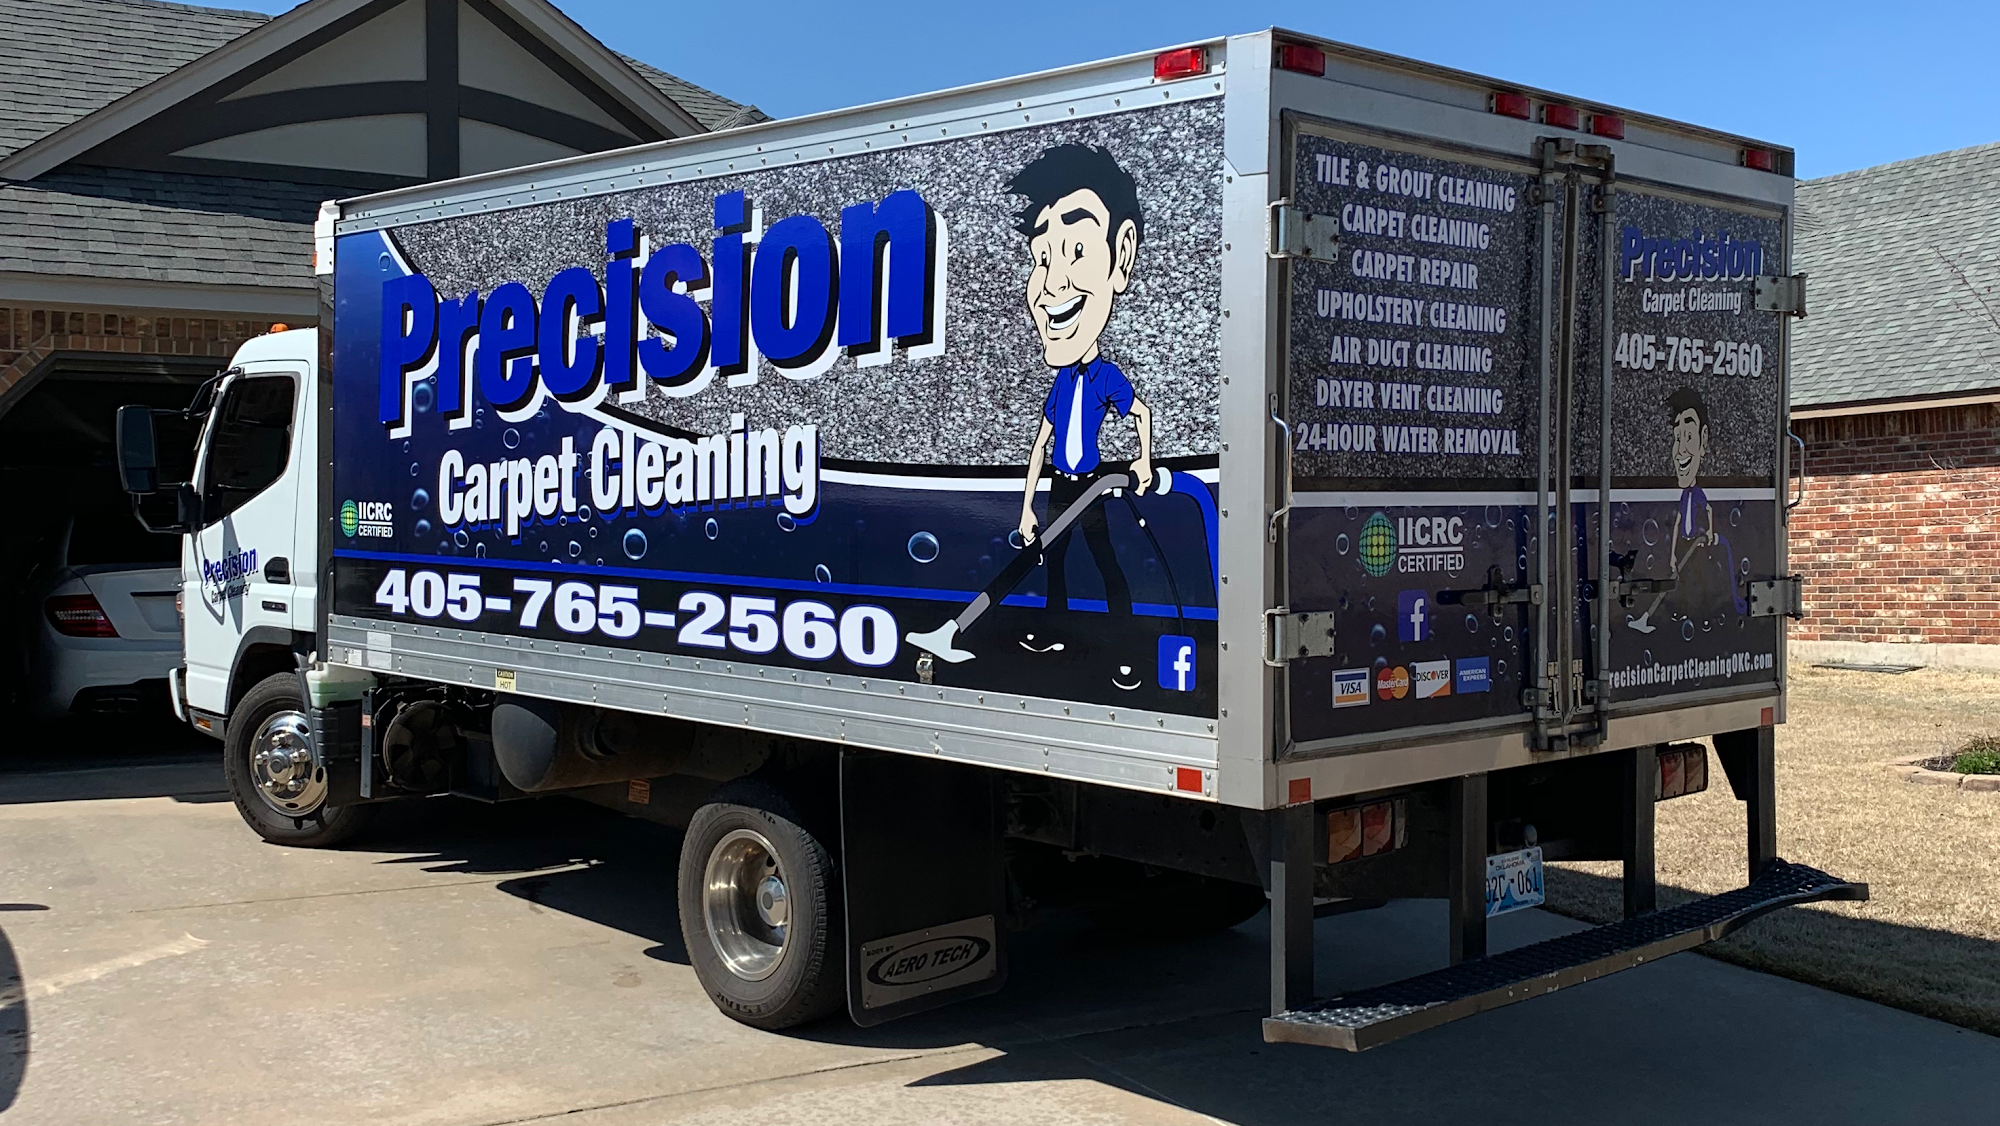 Precision Carpet Cleaning & Air Duct Cleaning